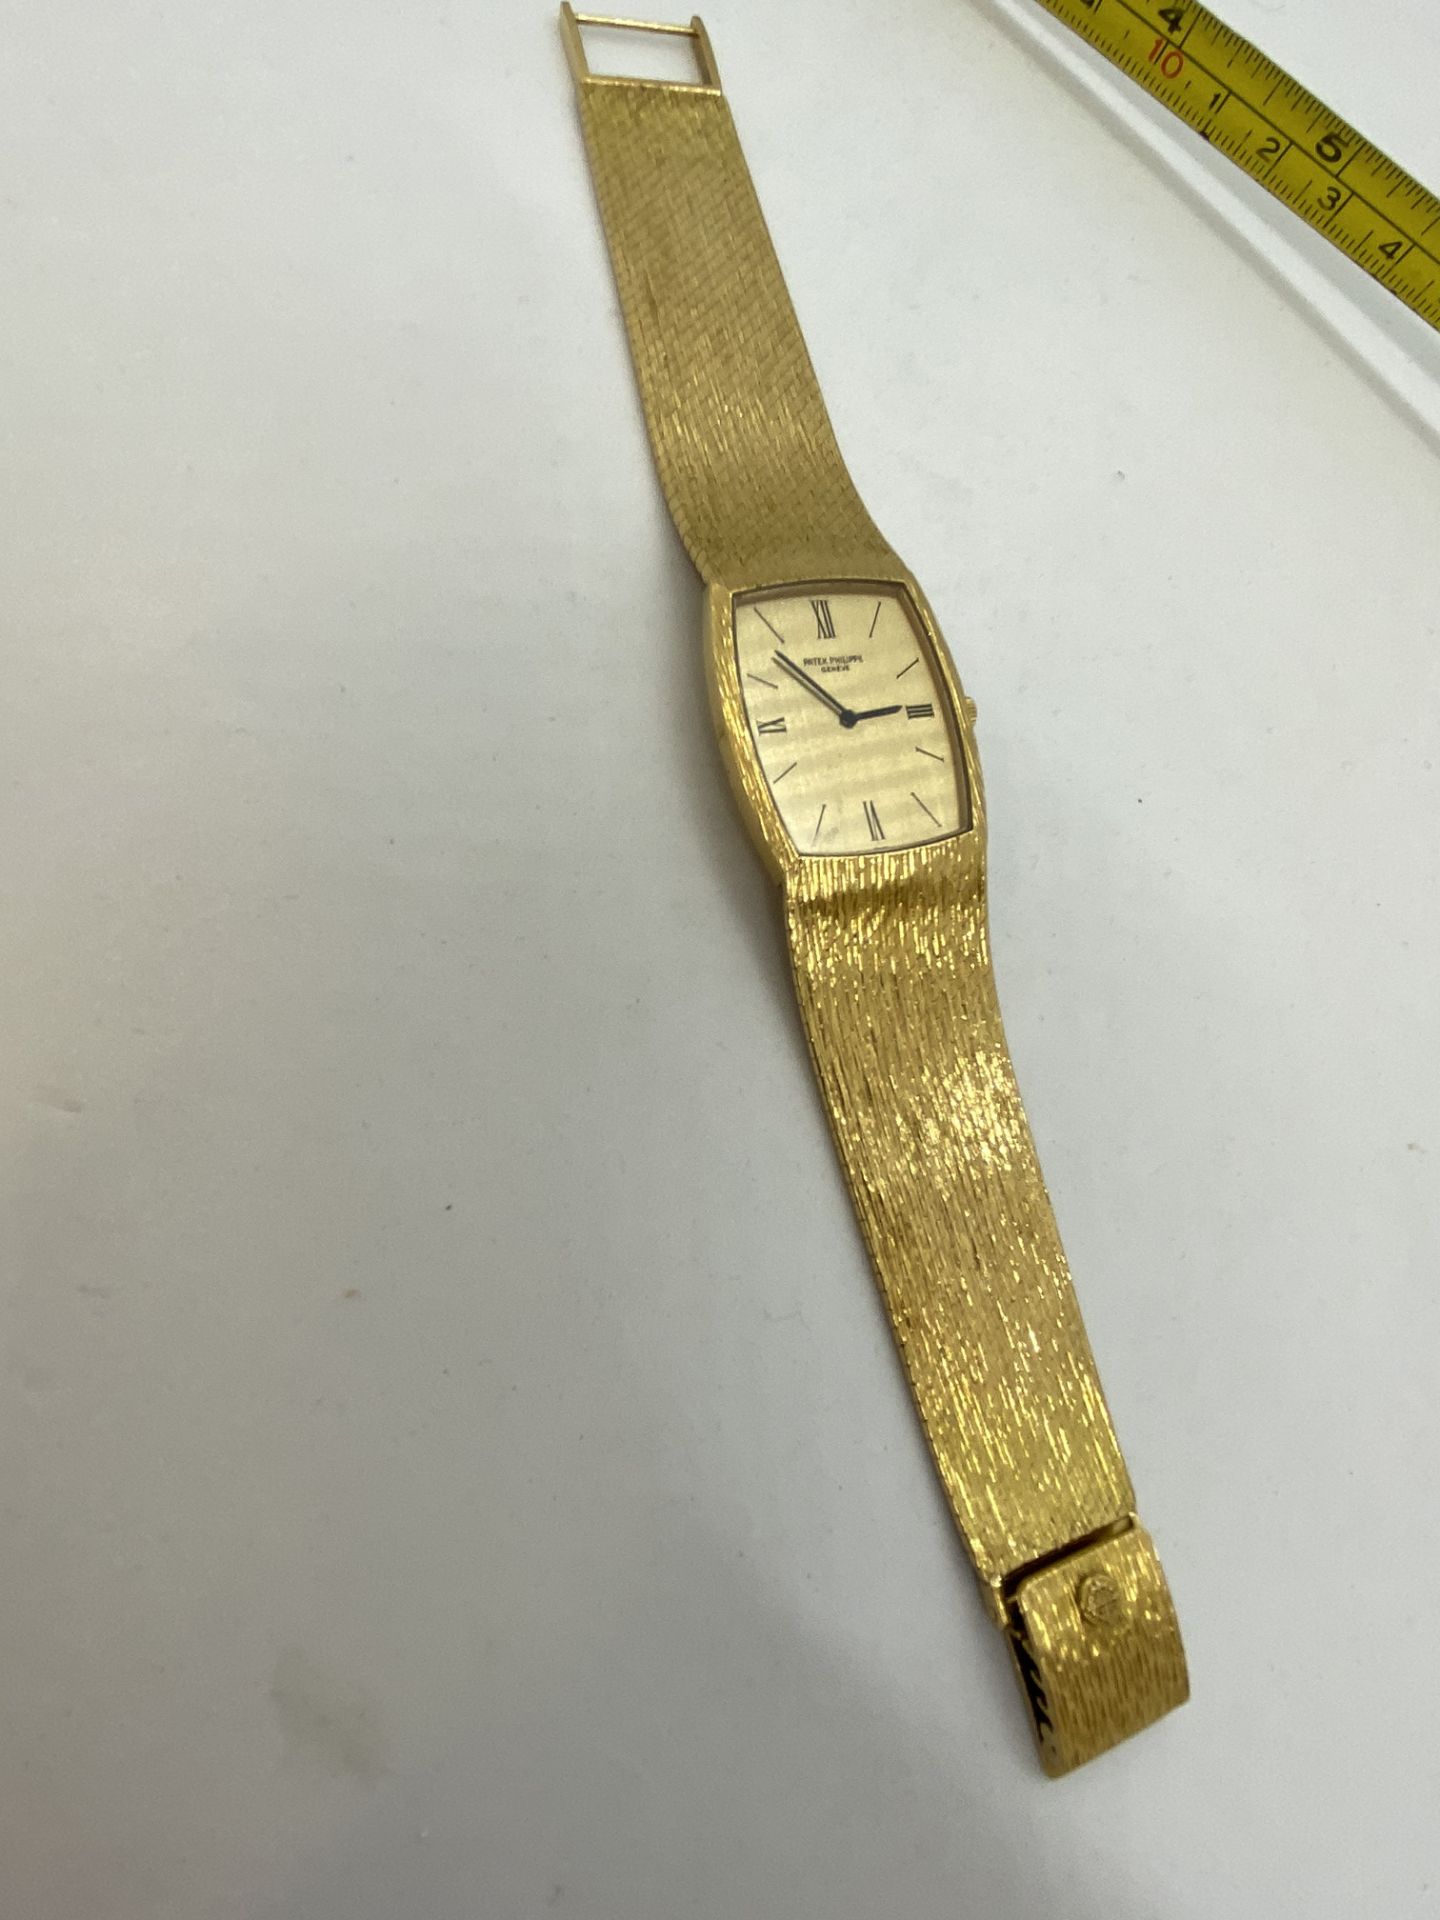 PHILLIPE PATEK 18ct GOLD WATCH - 82 GRAMS APPROX - Image 9 of 11